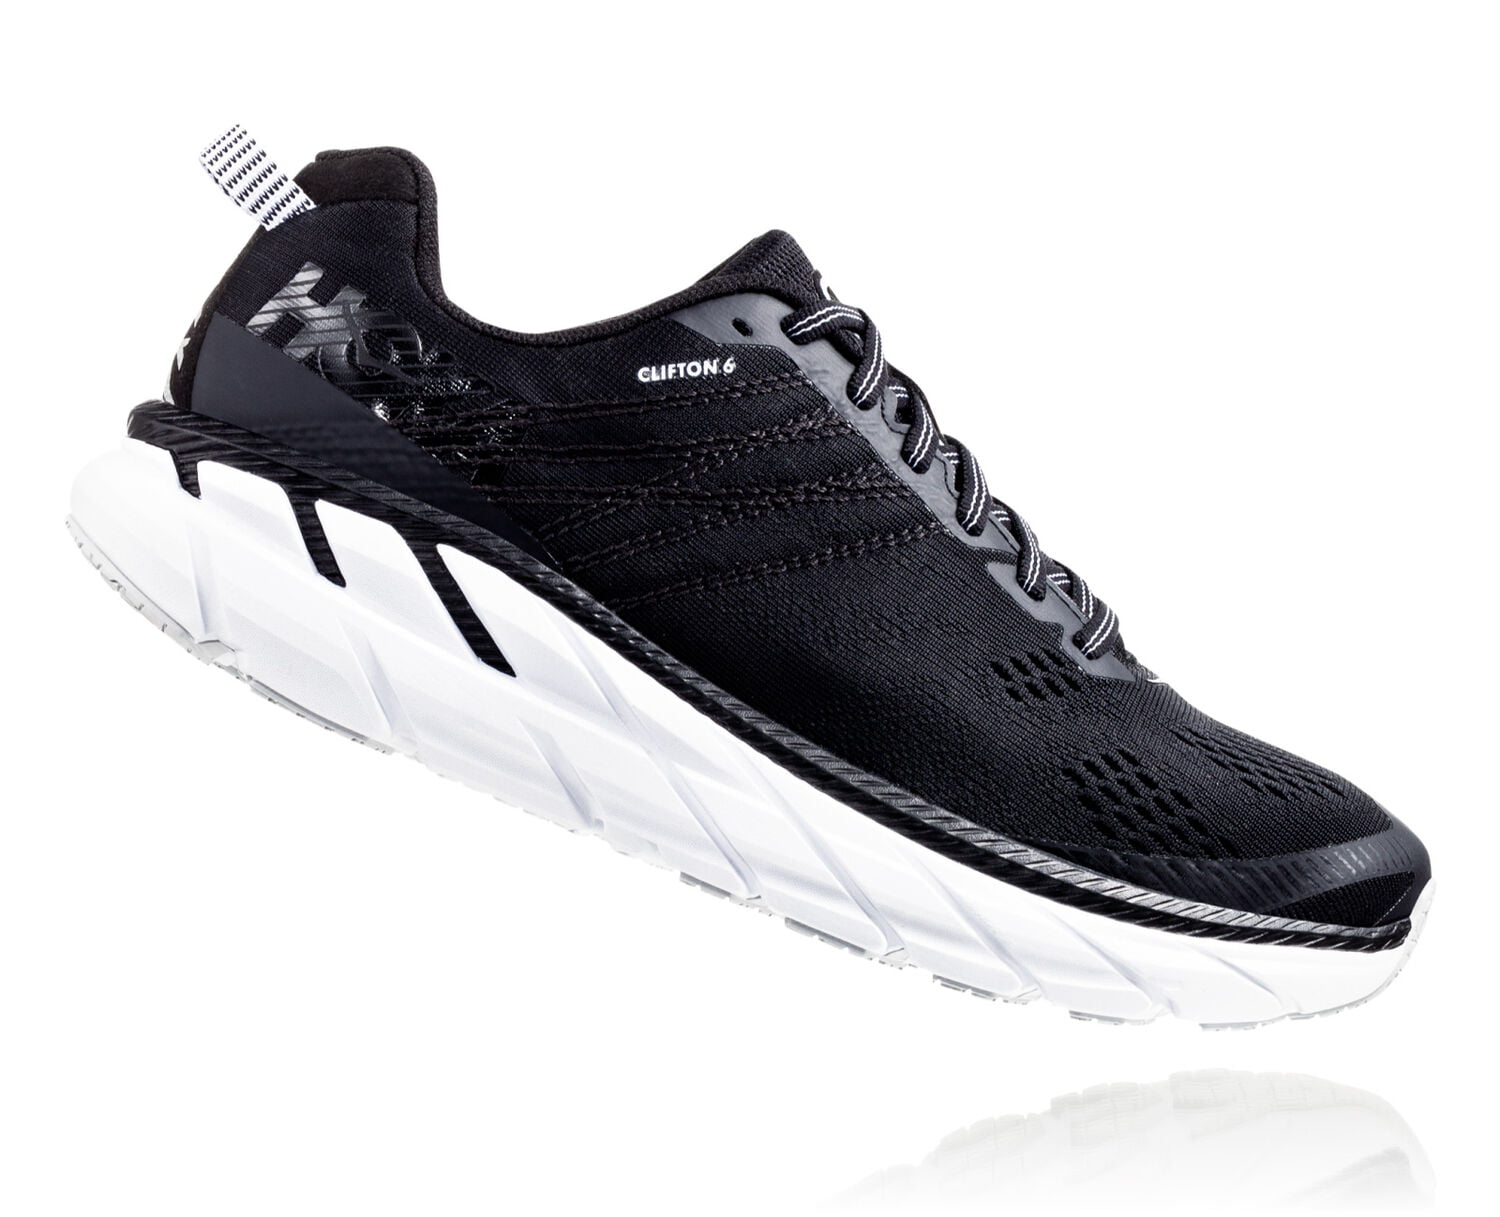 Clifton 6 Running Shoes 